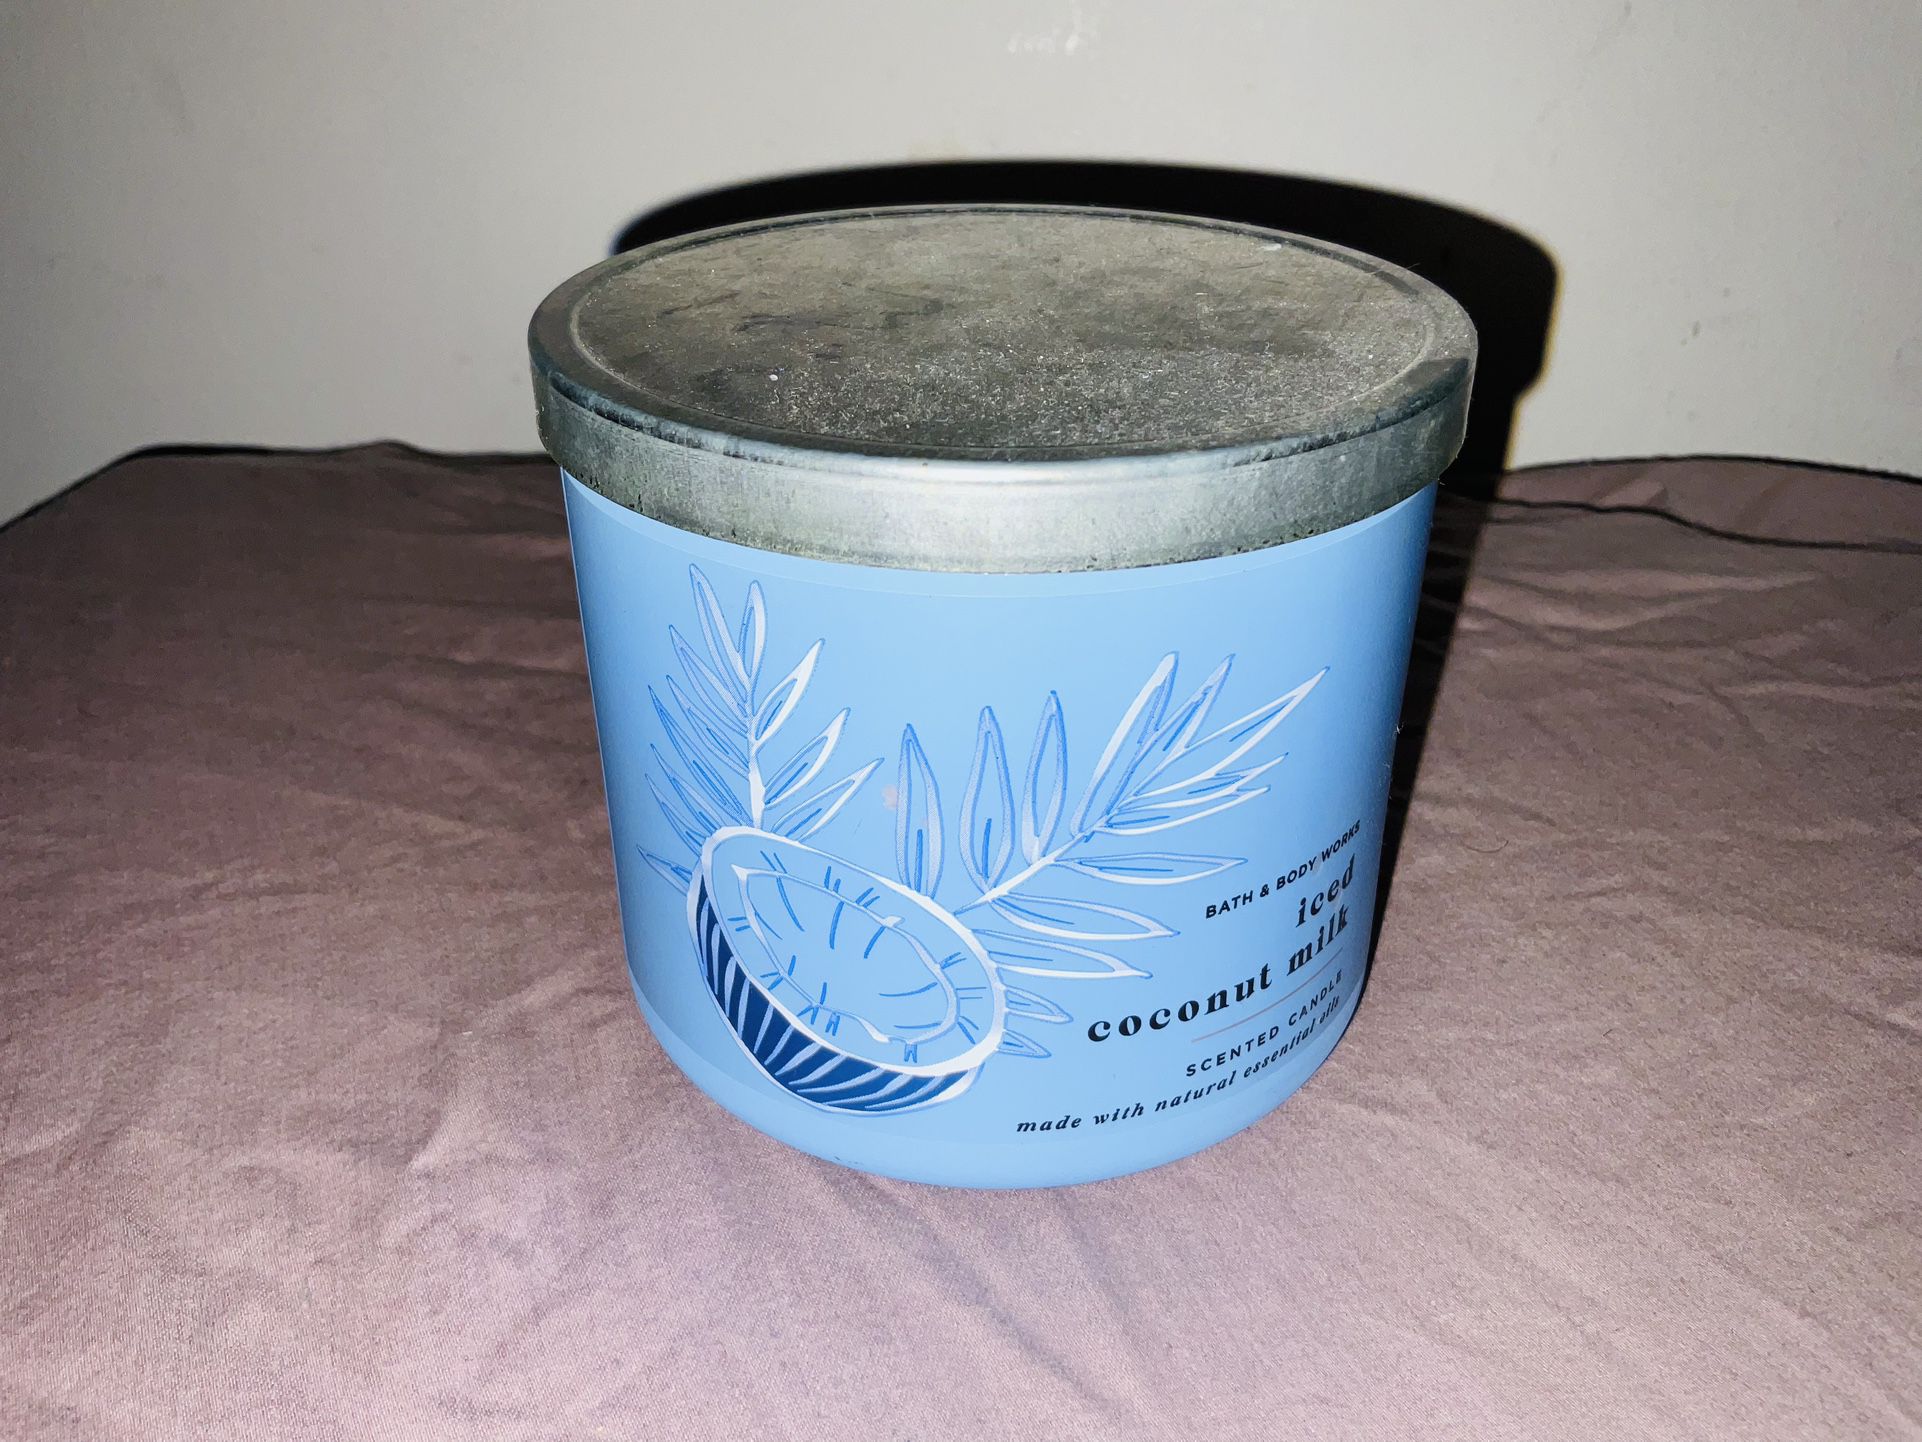 Iced Coconut Milk Bath And Body Works Candle